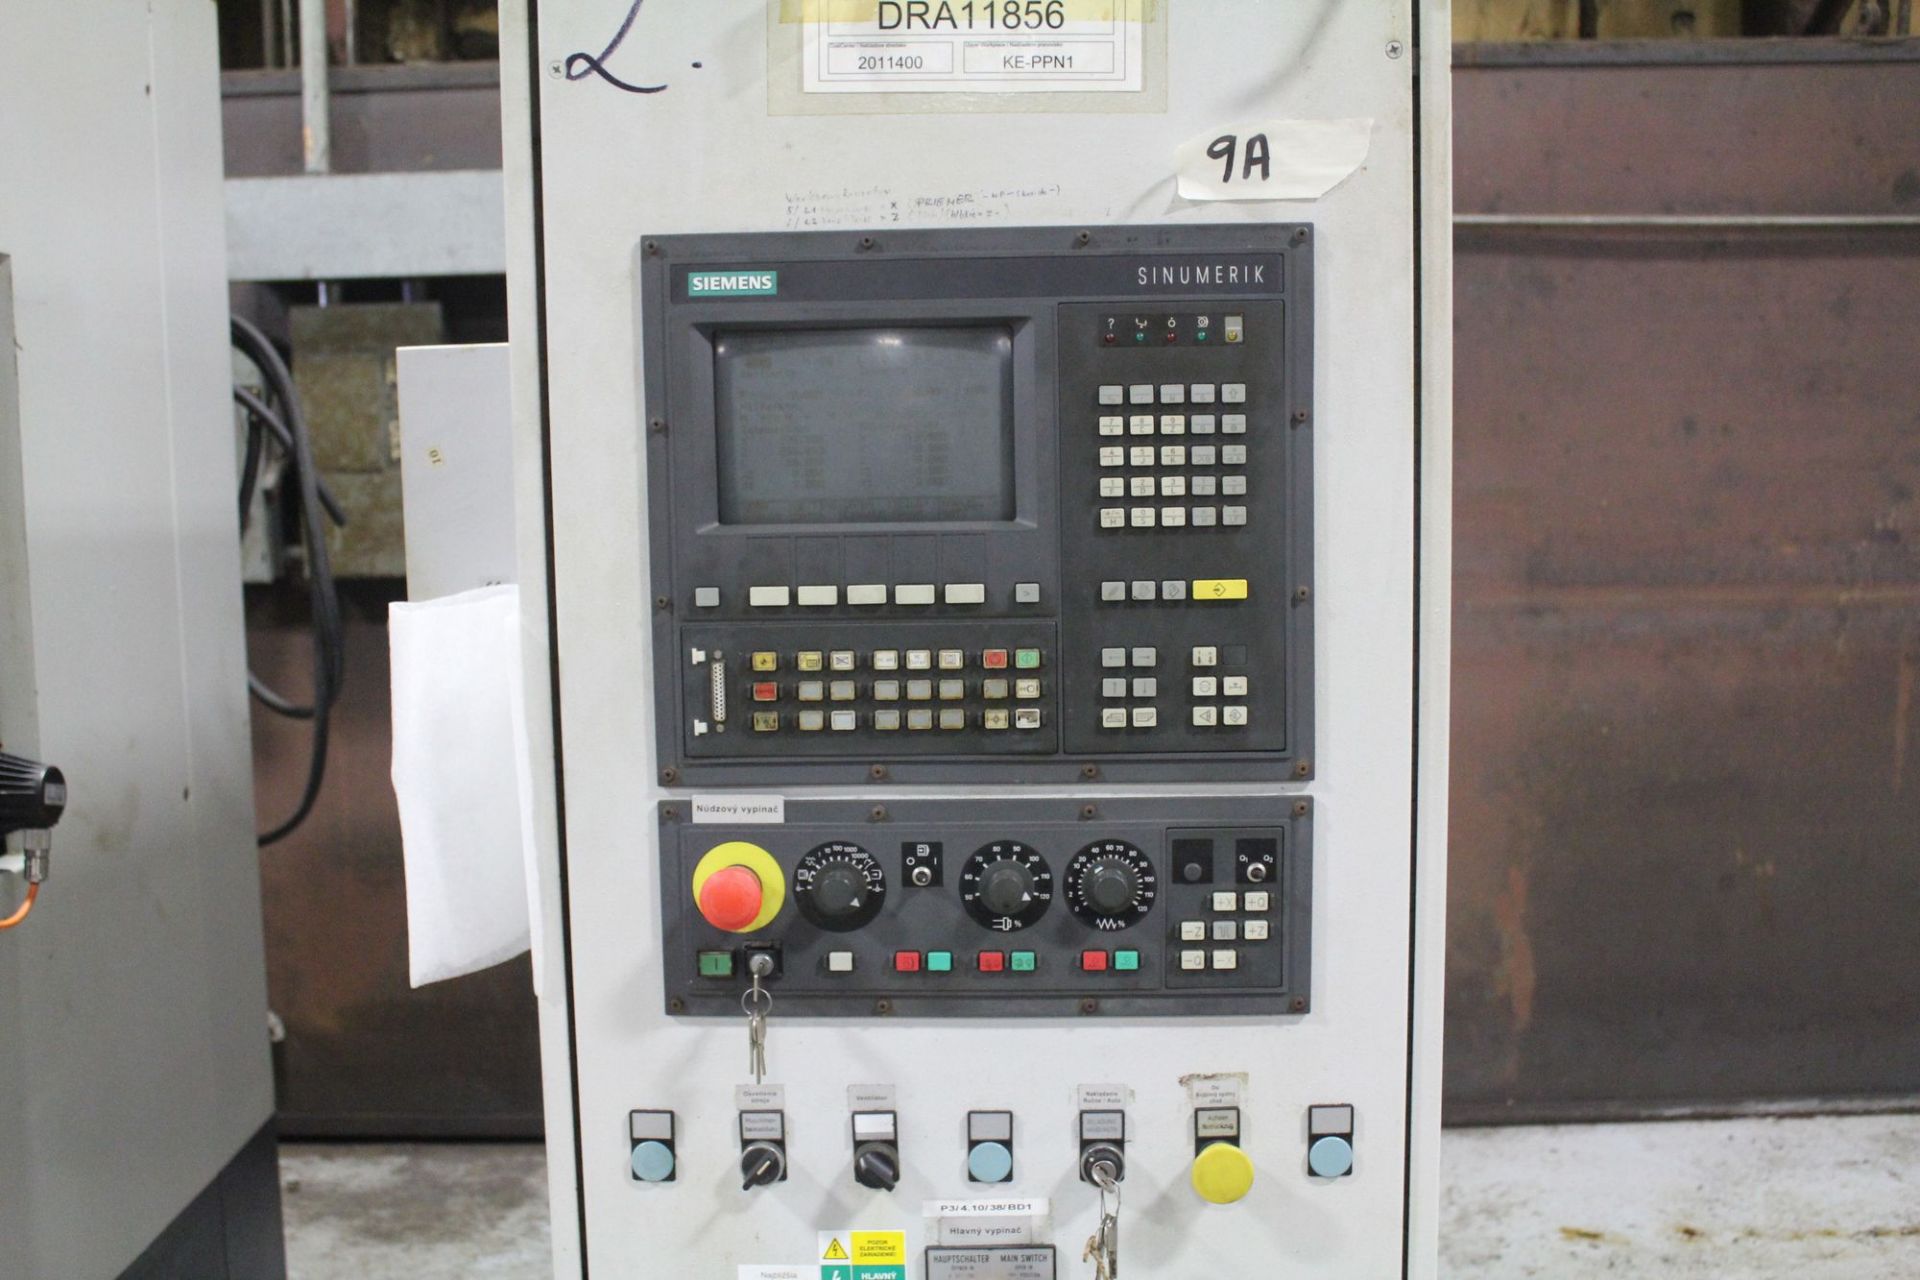 WERA MODEL RM-120 CNC GEAR PROFILATOR WITH FELSOMAT 9-PALLET PART STACKER, S/N 40-889-97 - Image 4 of 46